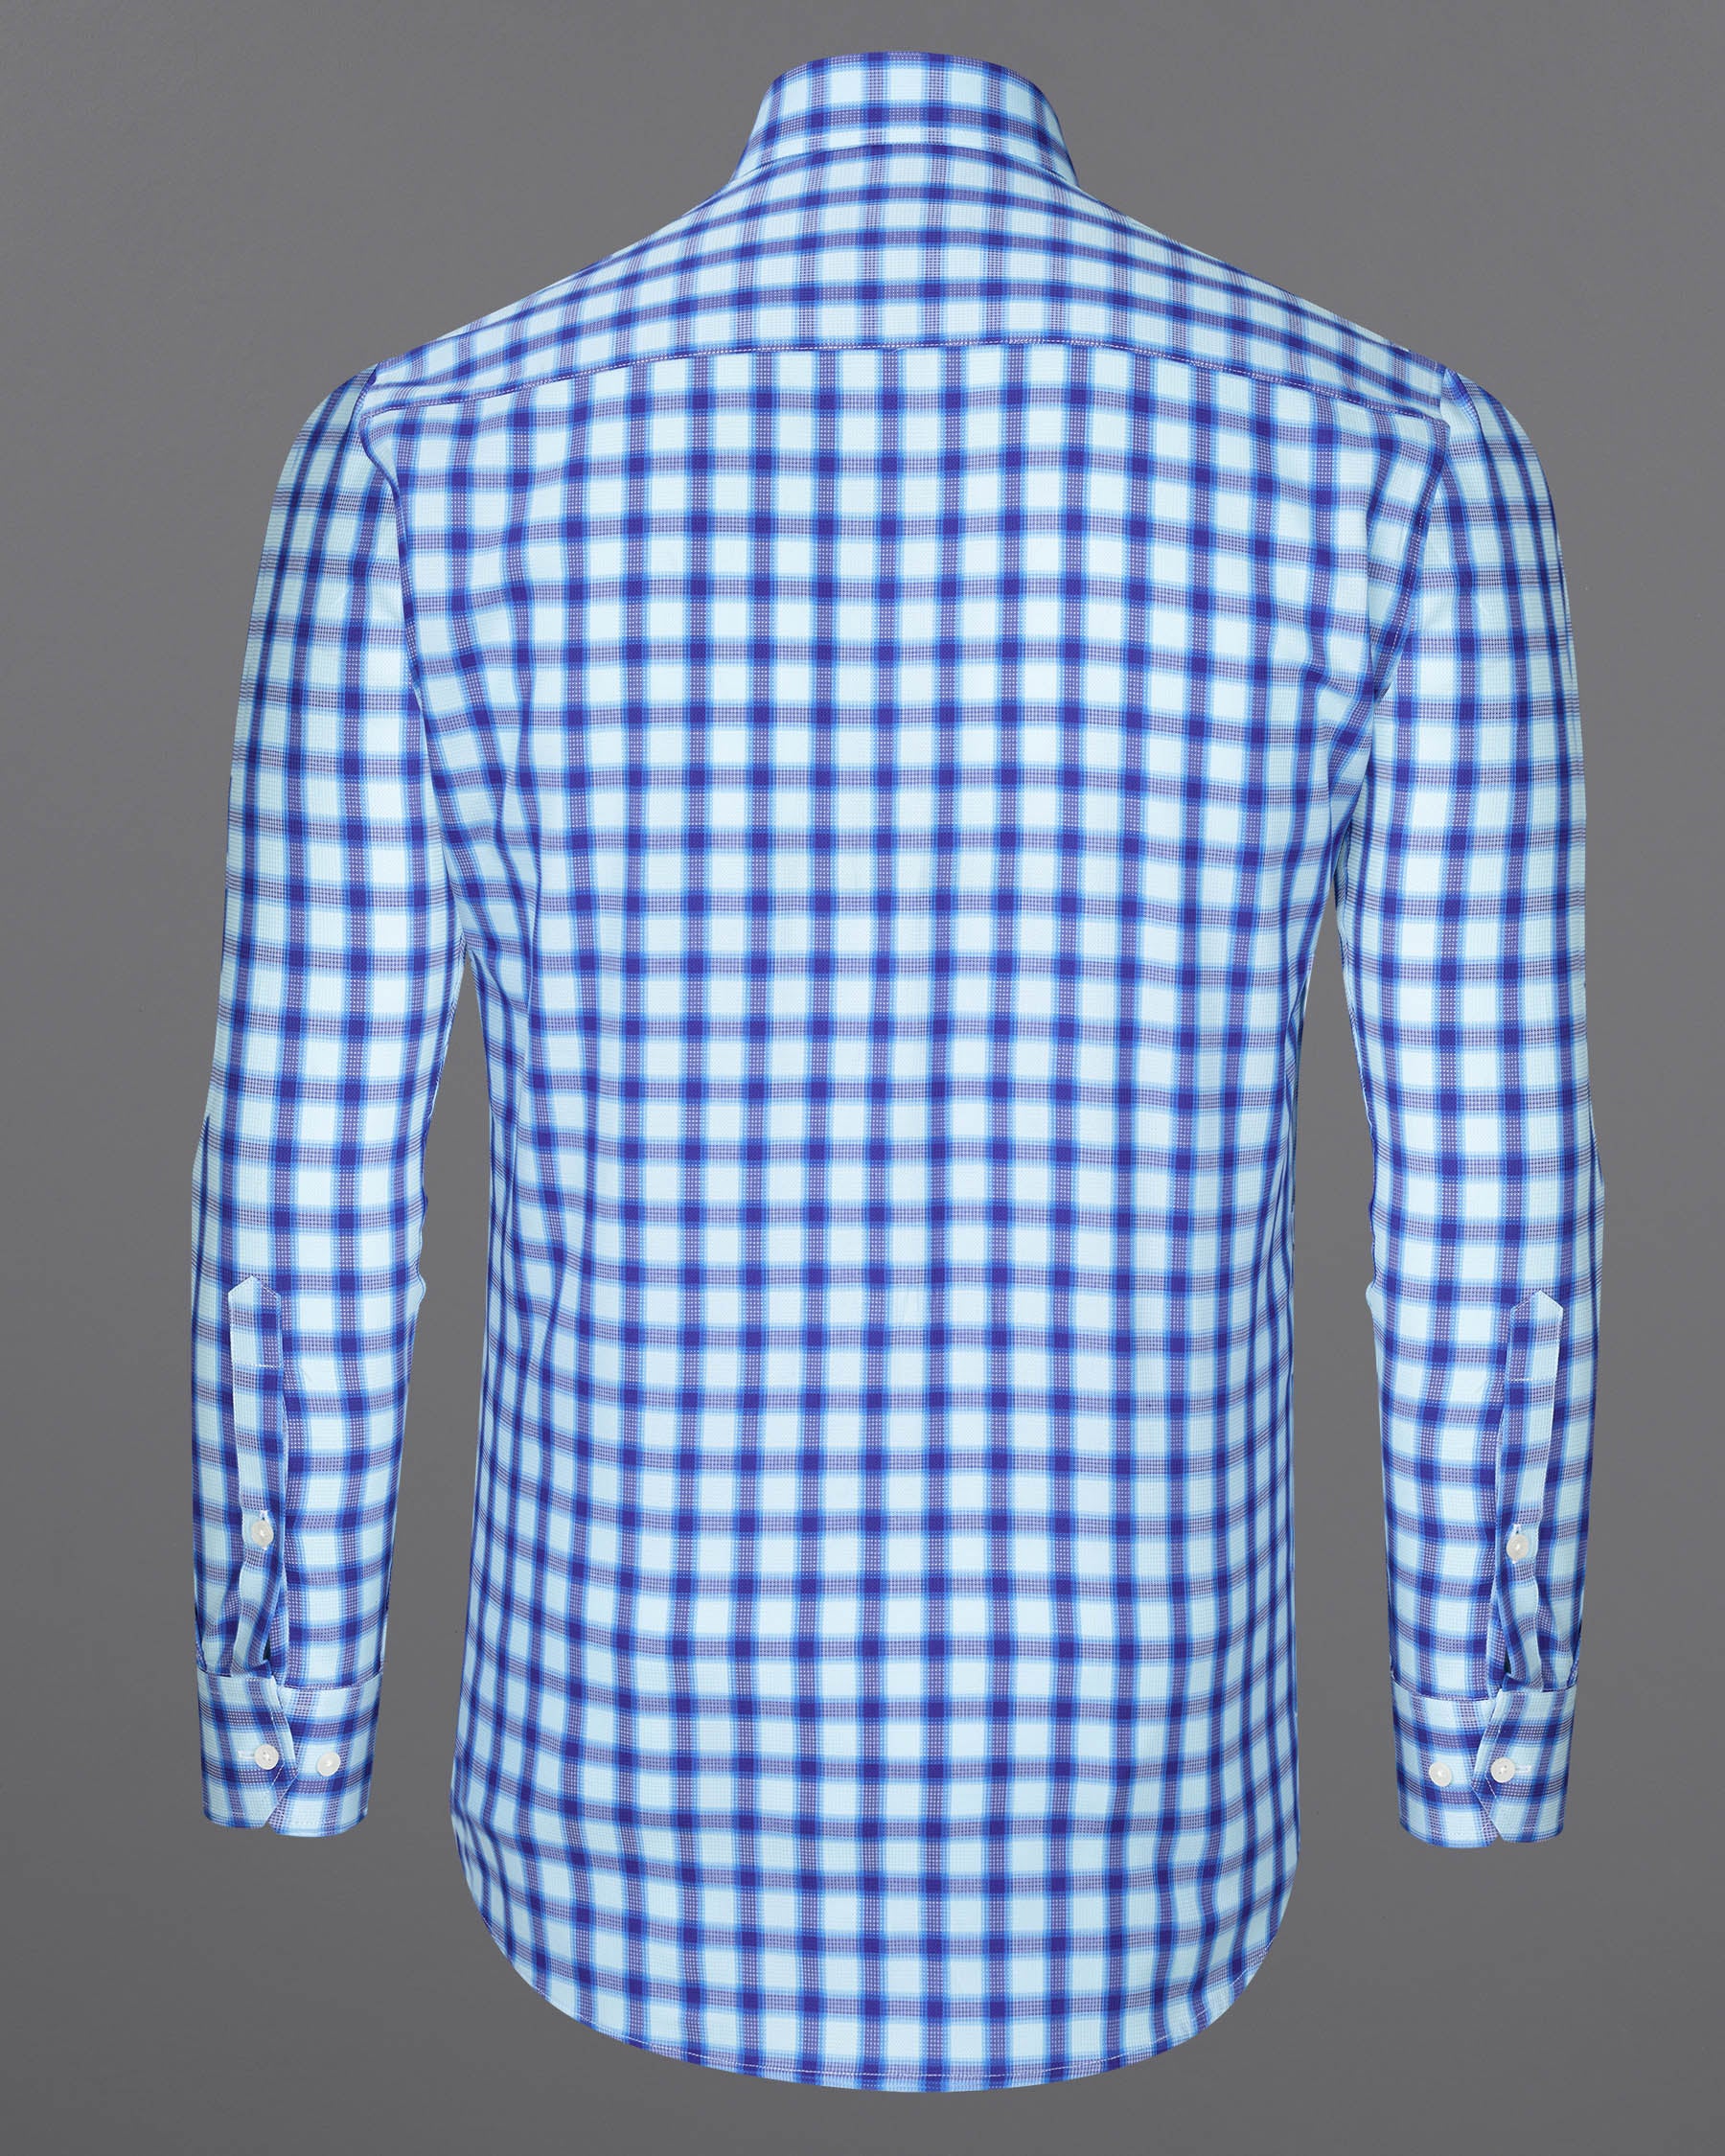 Jagged Ice and Cerulean Blue Checkered Dobby Textured Premium Giza Cotton Shirt